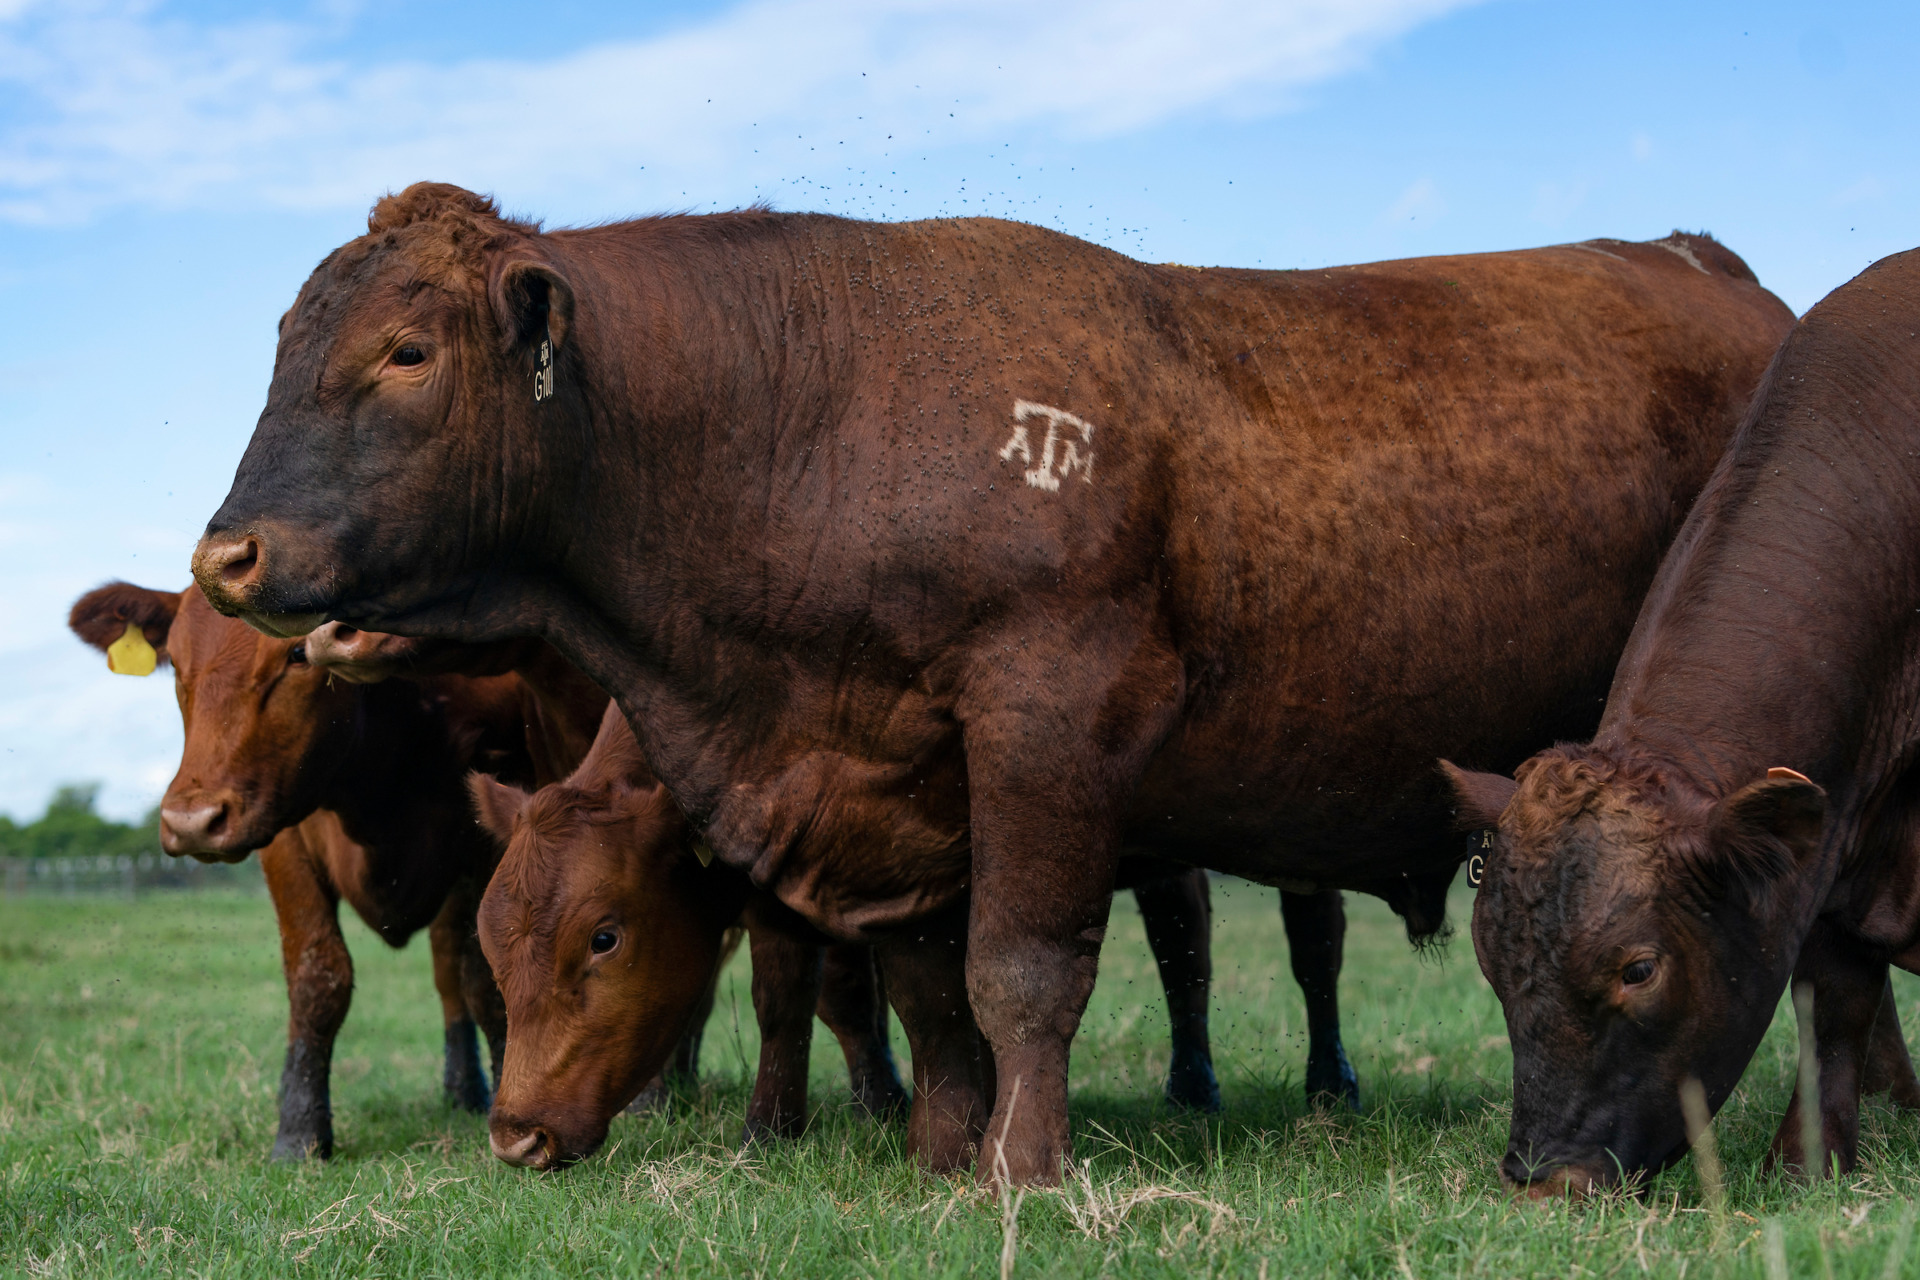 Lacey Luense, Ph.D., Texas A&M Department of Animal Science assistant professor, is determined to improve the fertility of bulls by understanding how epigenetics affect disease and development. (Photo by Laura McKenzie, Texas A&M AgriLife.)